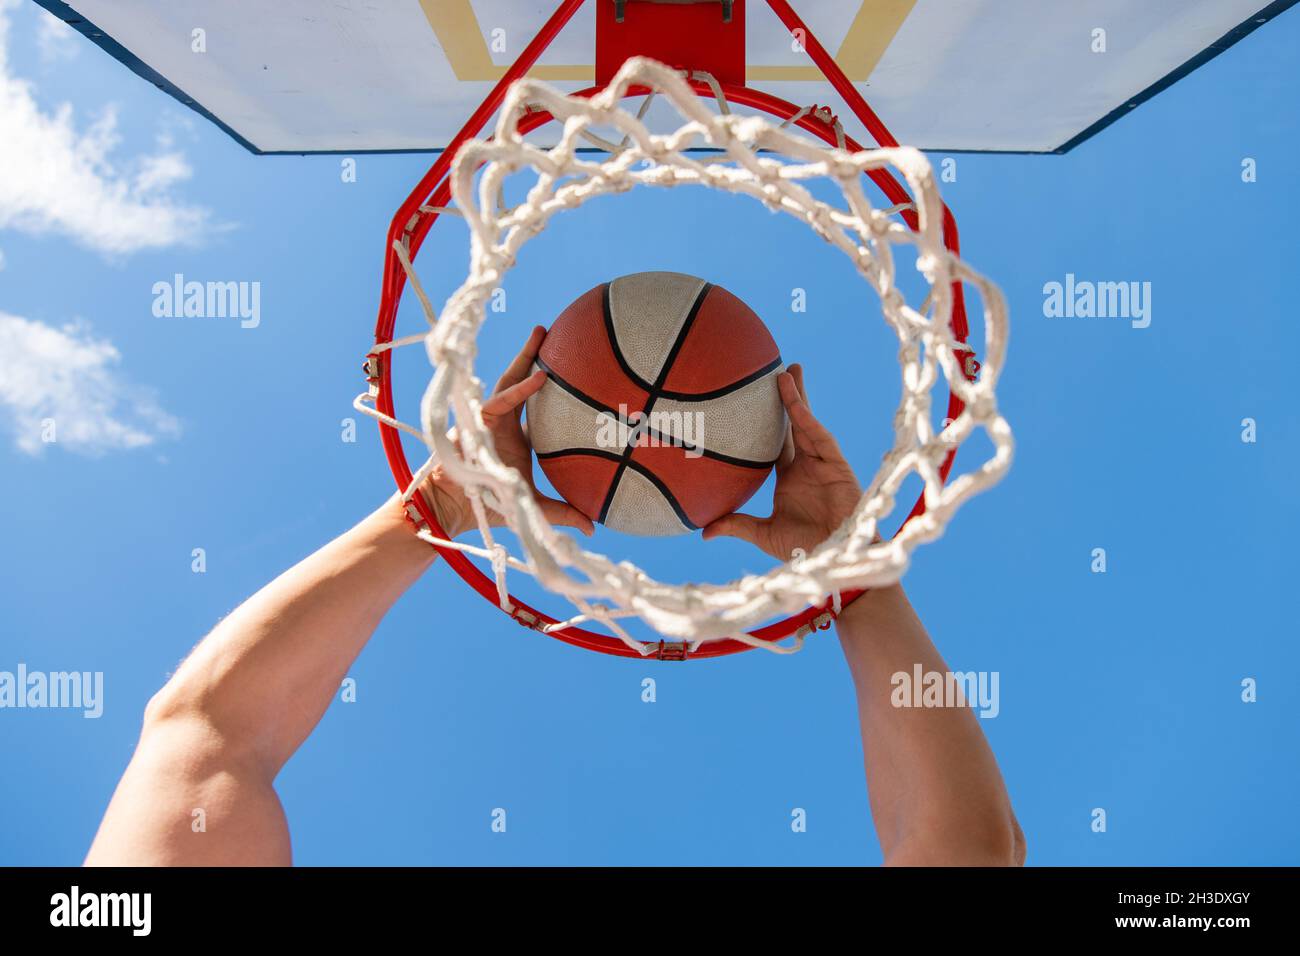 professional player. sport success. scoring during basketball game. Stock Photo